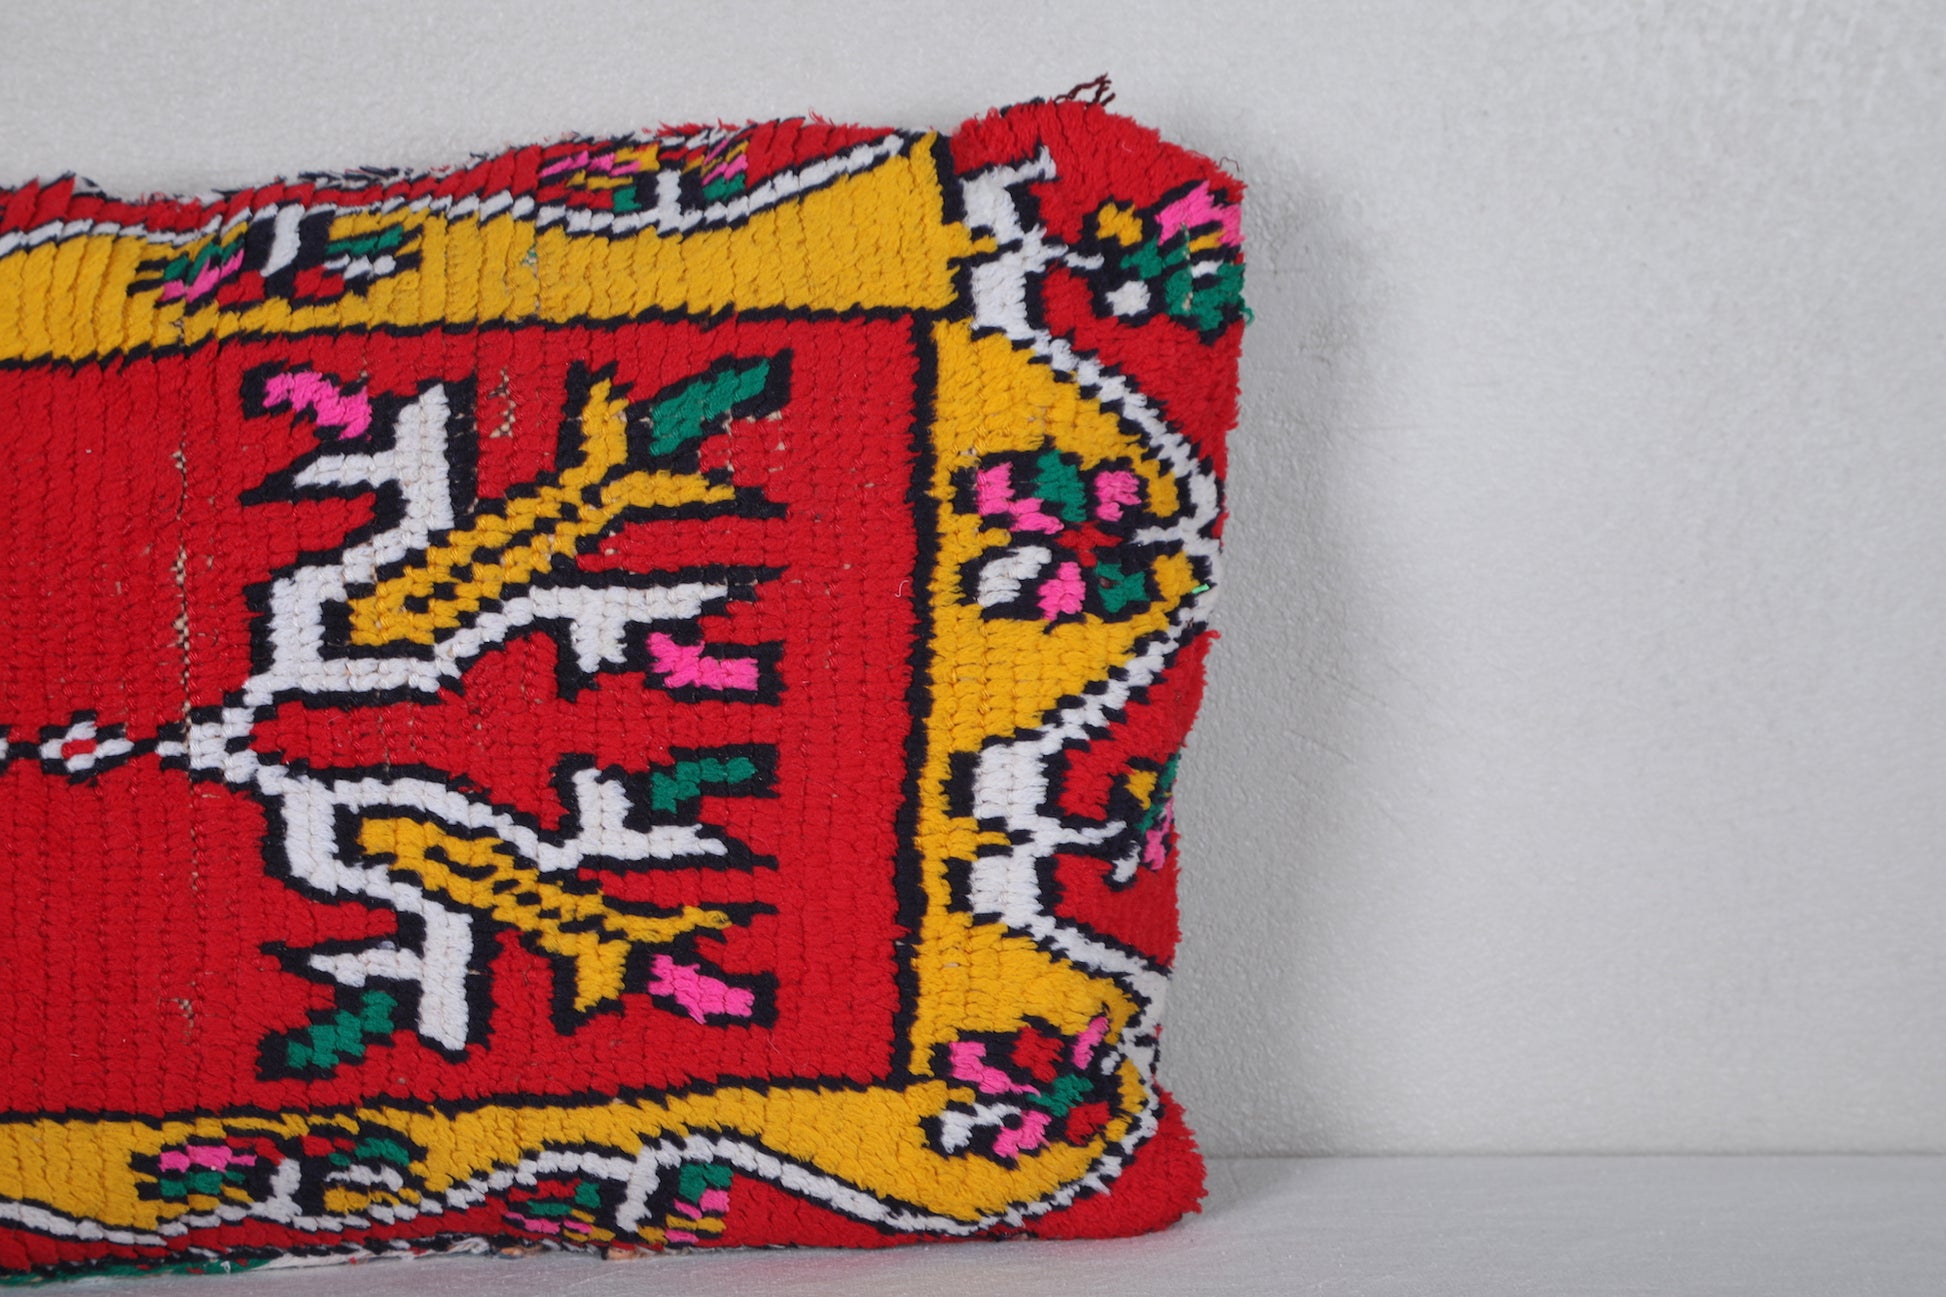 Vintage Berber kilim pillow 11.4 INCHES X 20.8 INCHES